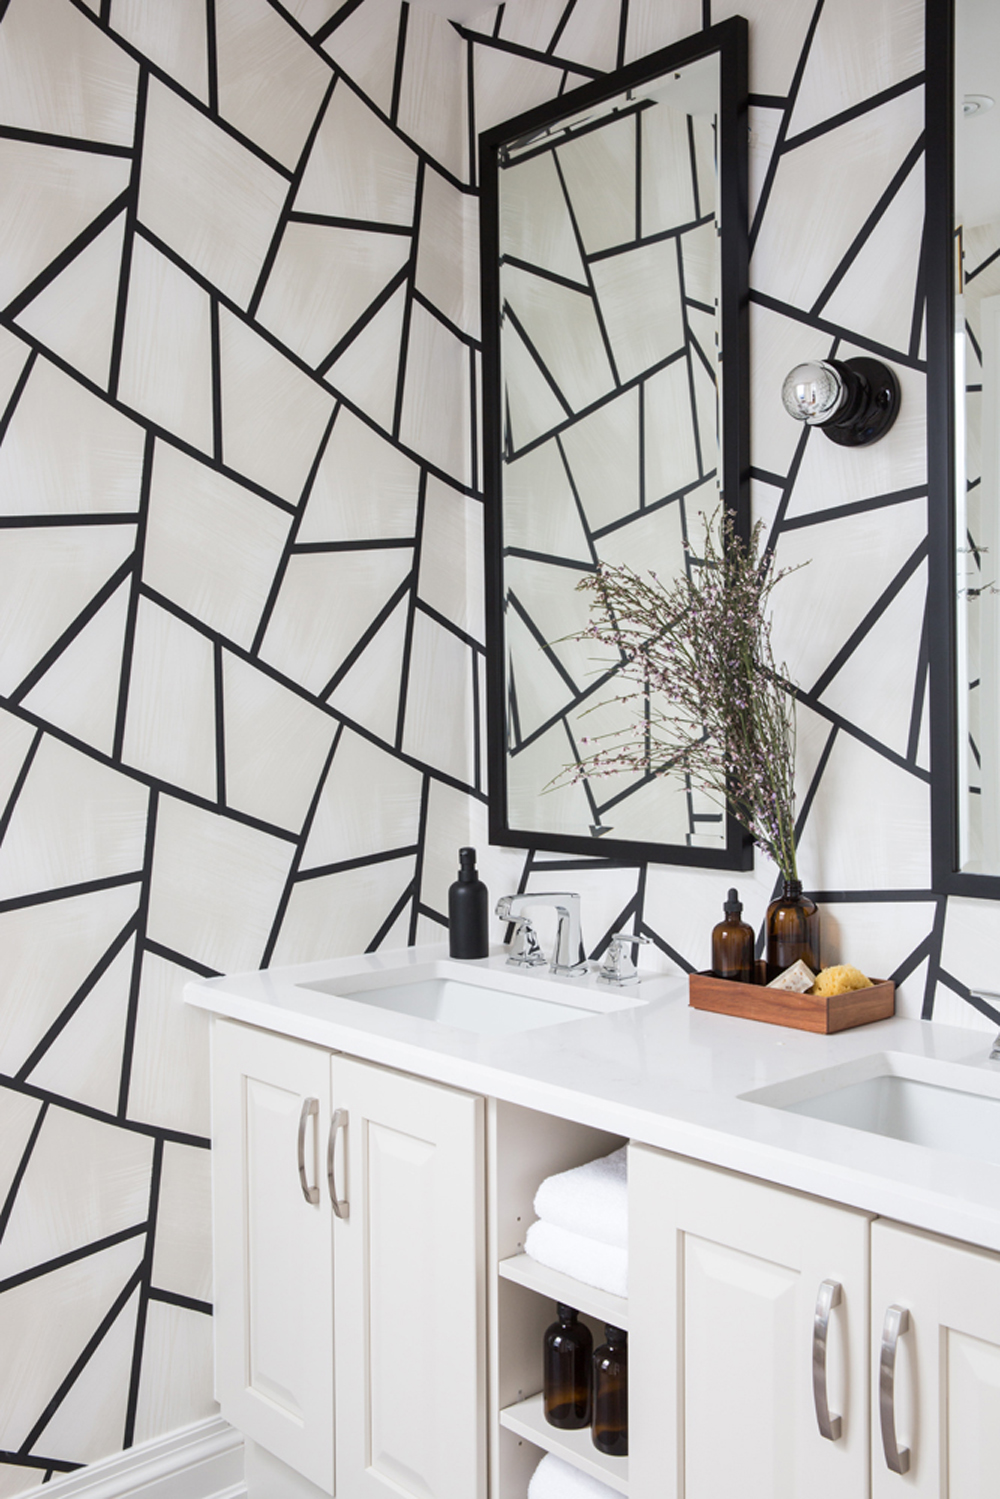 Geometric wallpaper in an otherwise simple, small bathroom